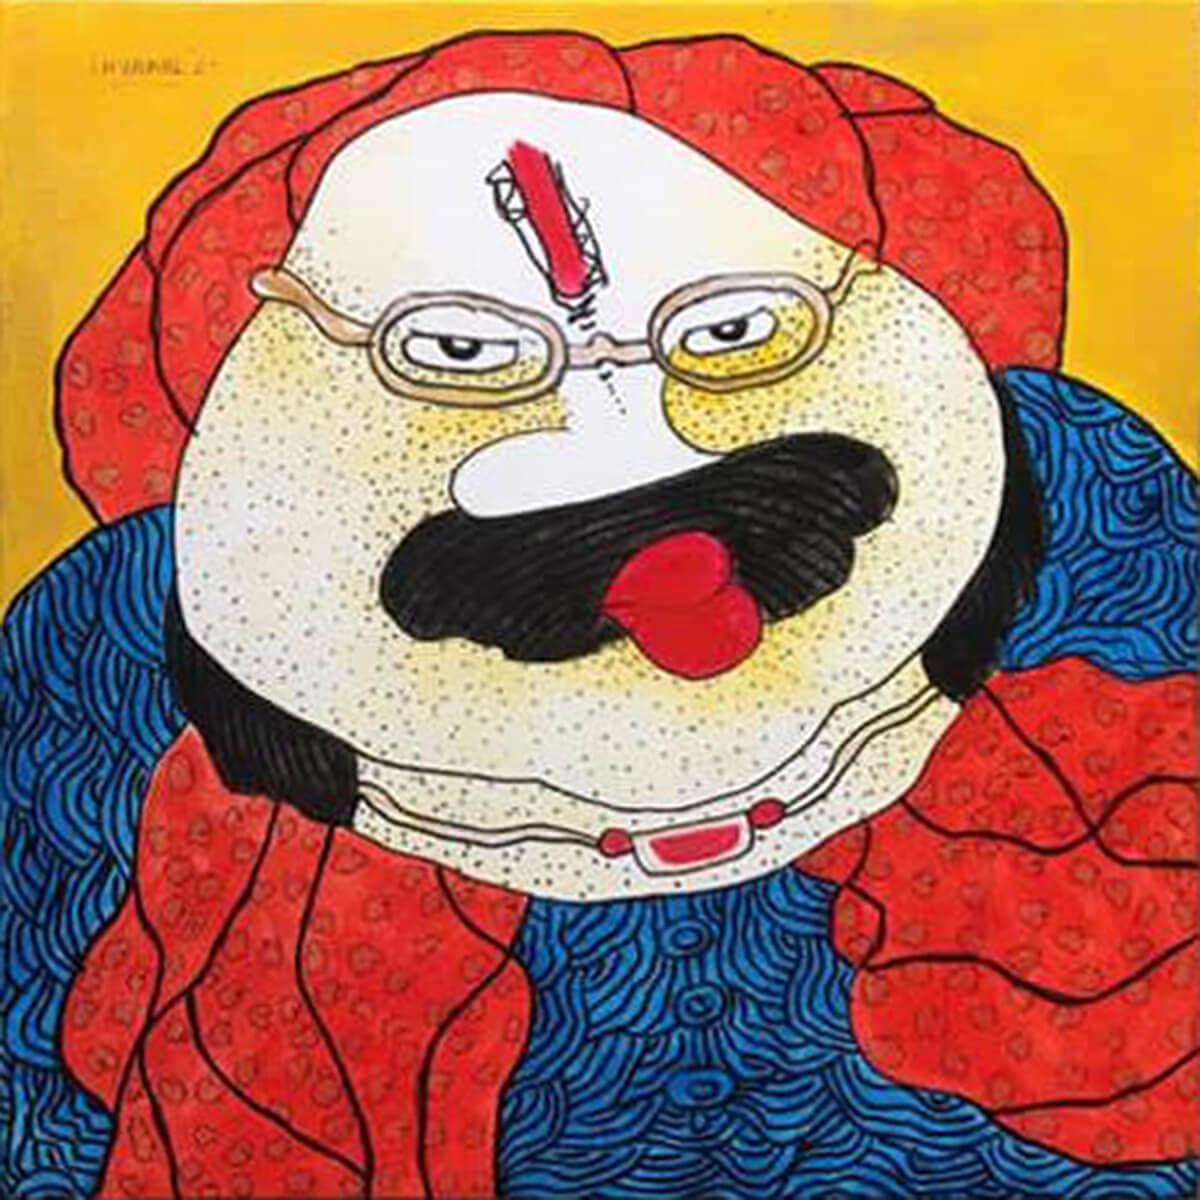 Shyamal Mukherjee  -  Bawa Biwi -  12 x 12 inches (unframed size)   
Acrylic on Canvas, 2021 (Set of 2)

About the Artist :

Mukherjee was born in 1961, and spent all of his college years in Santiniketan, first completing his BFA in 1987, and then